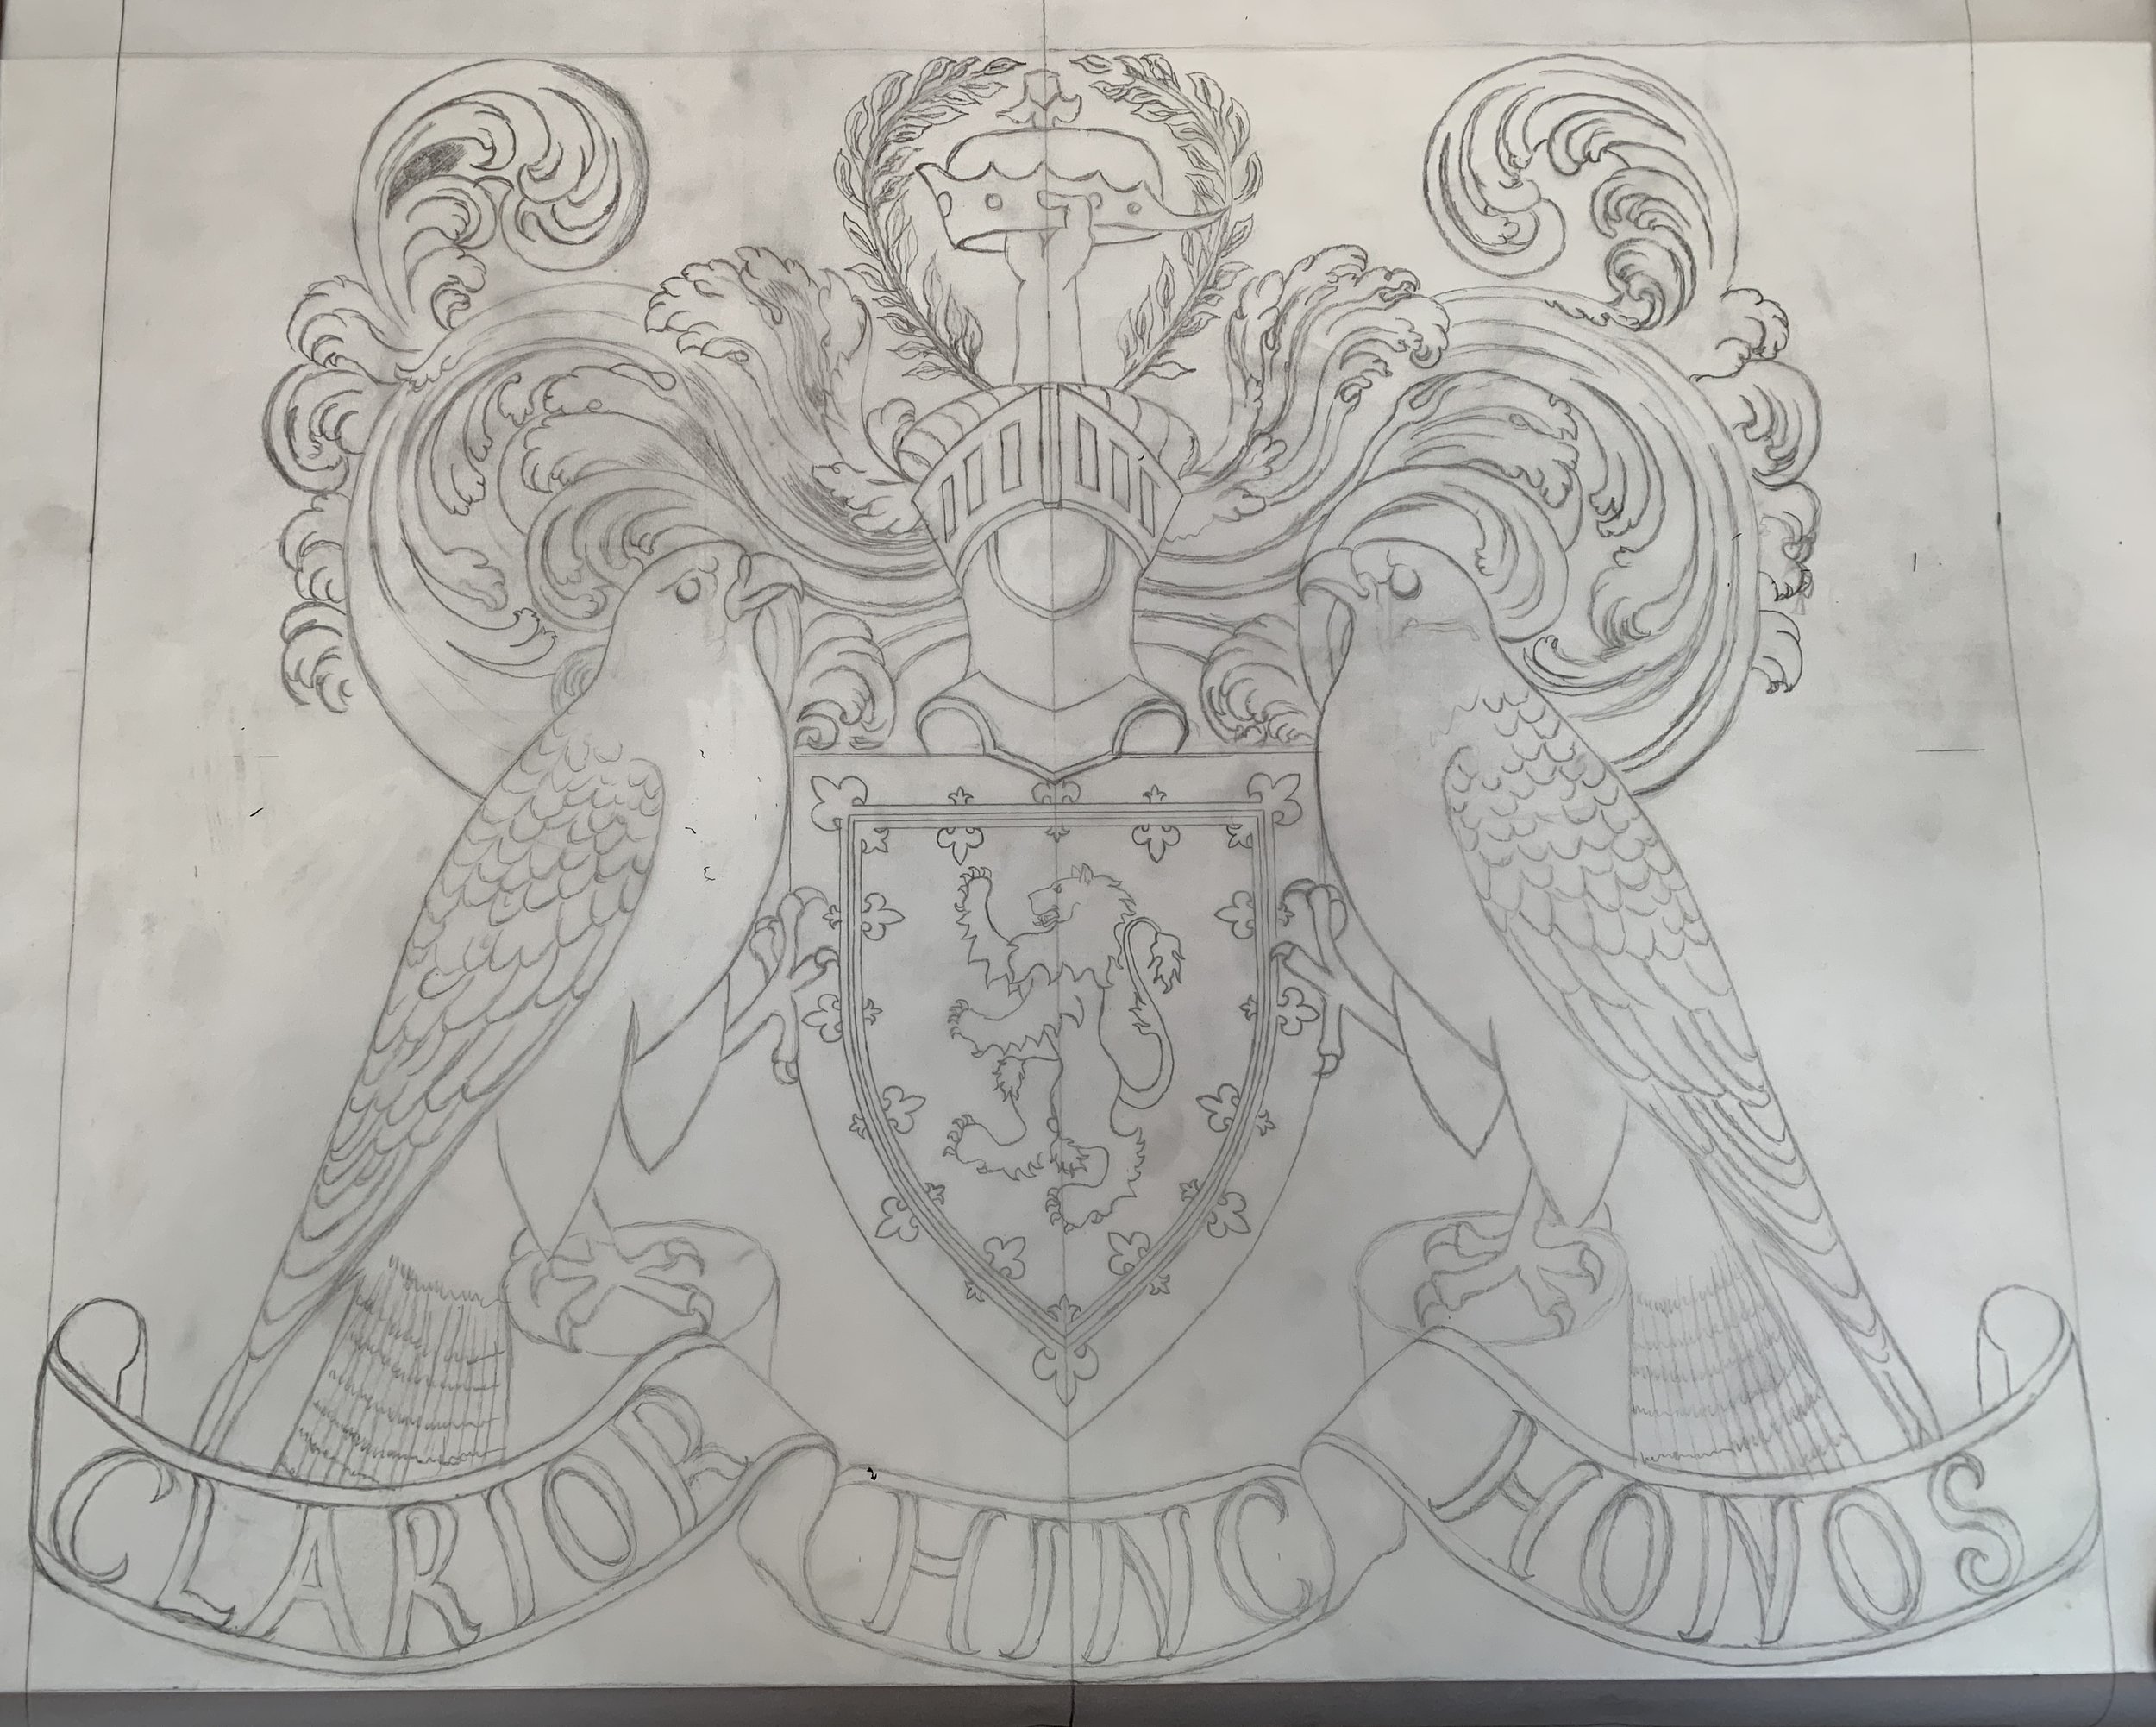  The sketch of the crest 